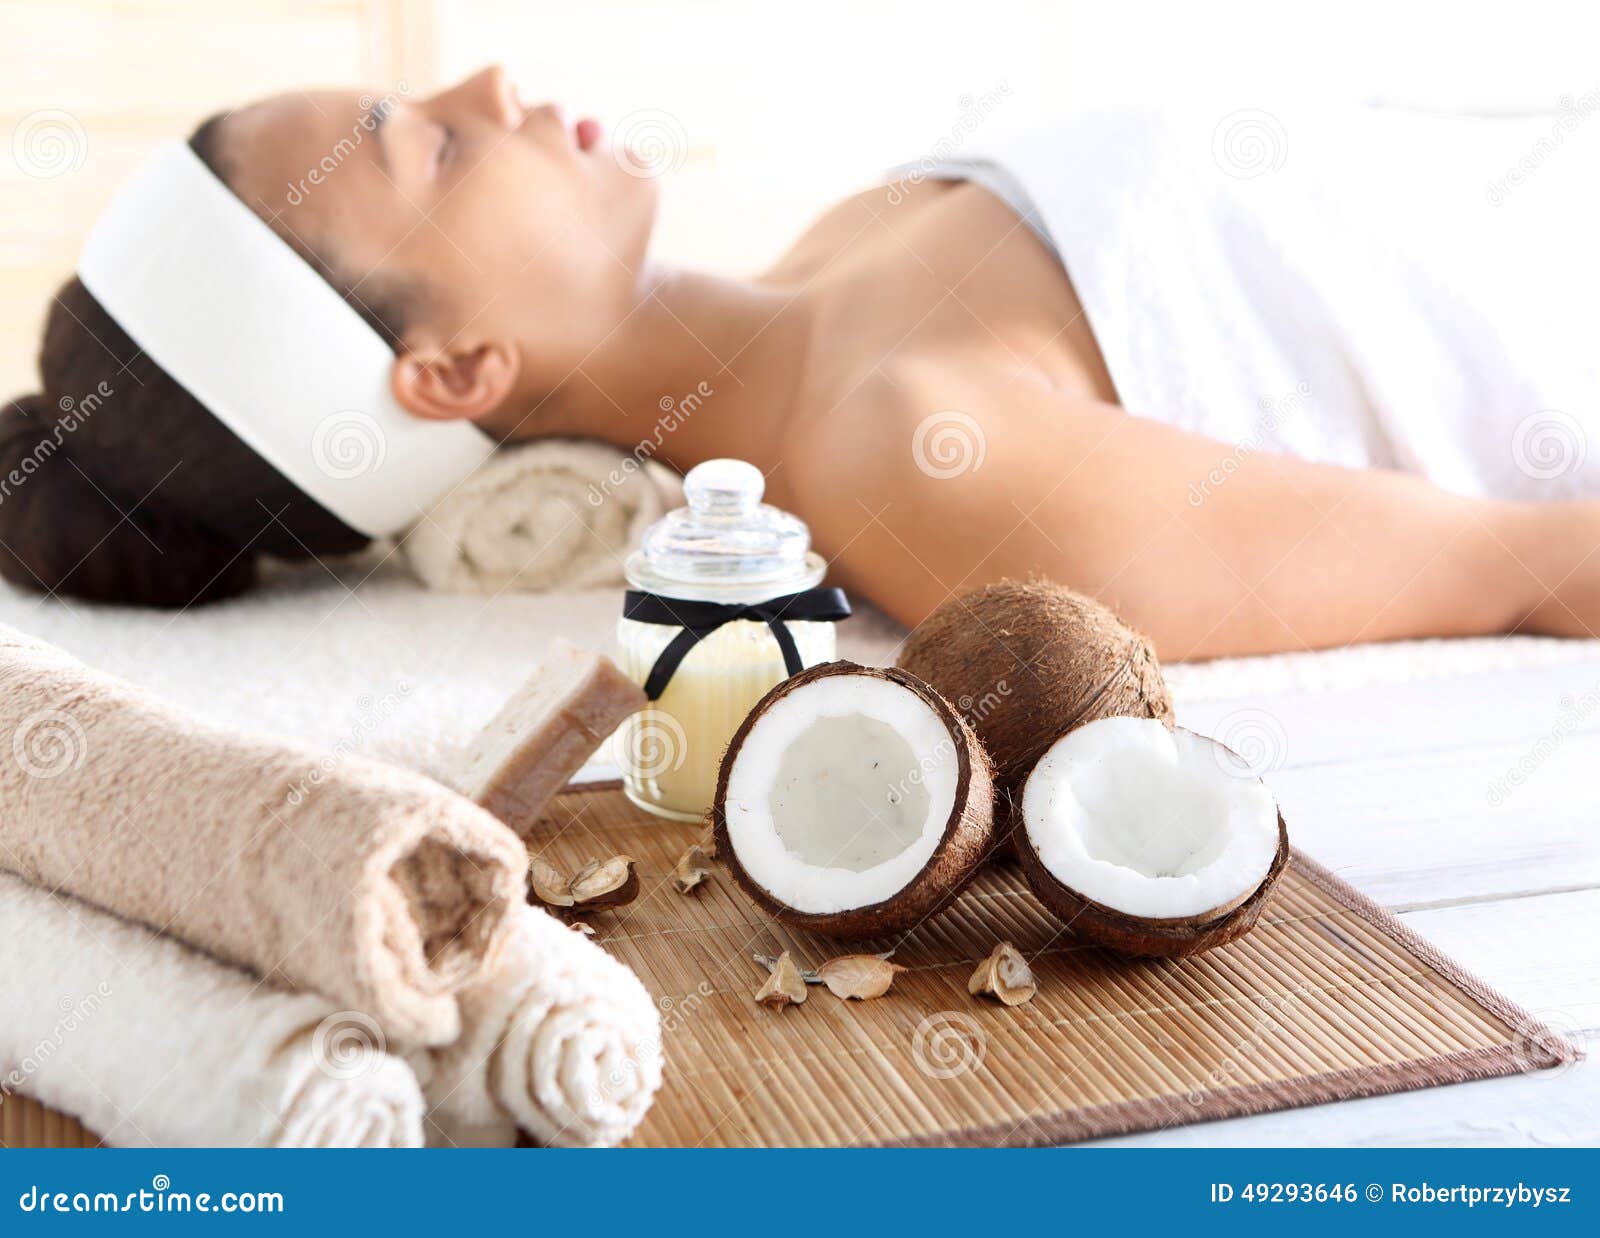 Wellness And Spa Treatment With Coconut Oil Feminine Relaxation Stock